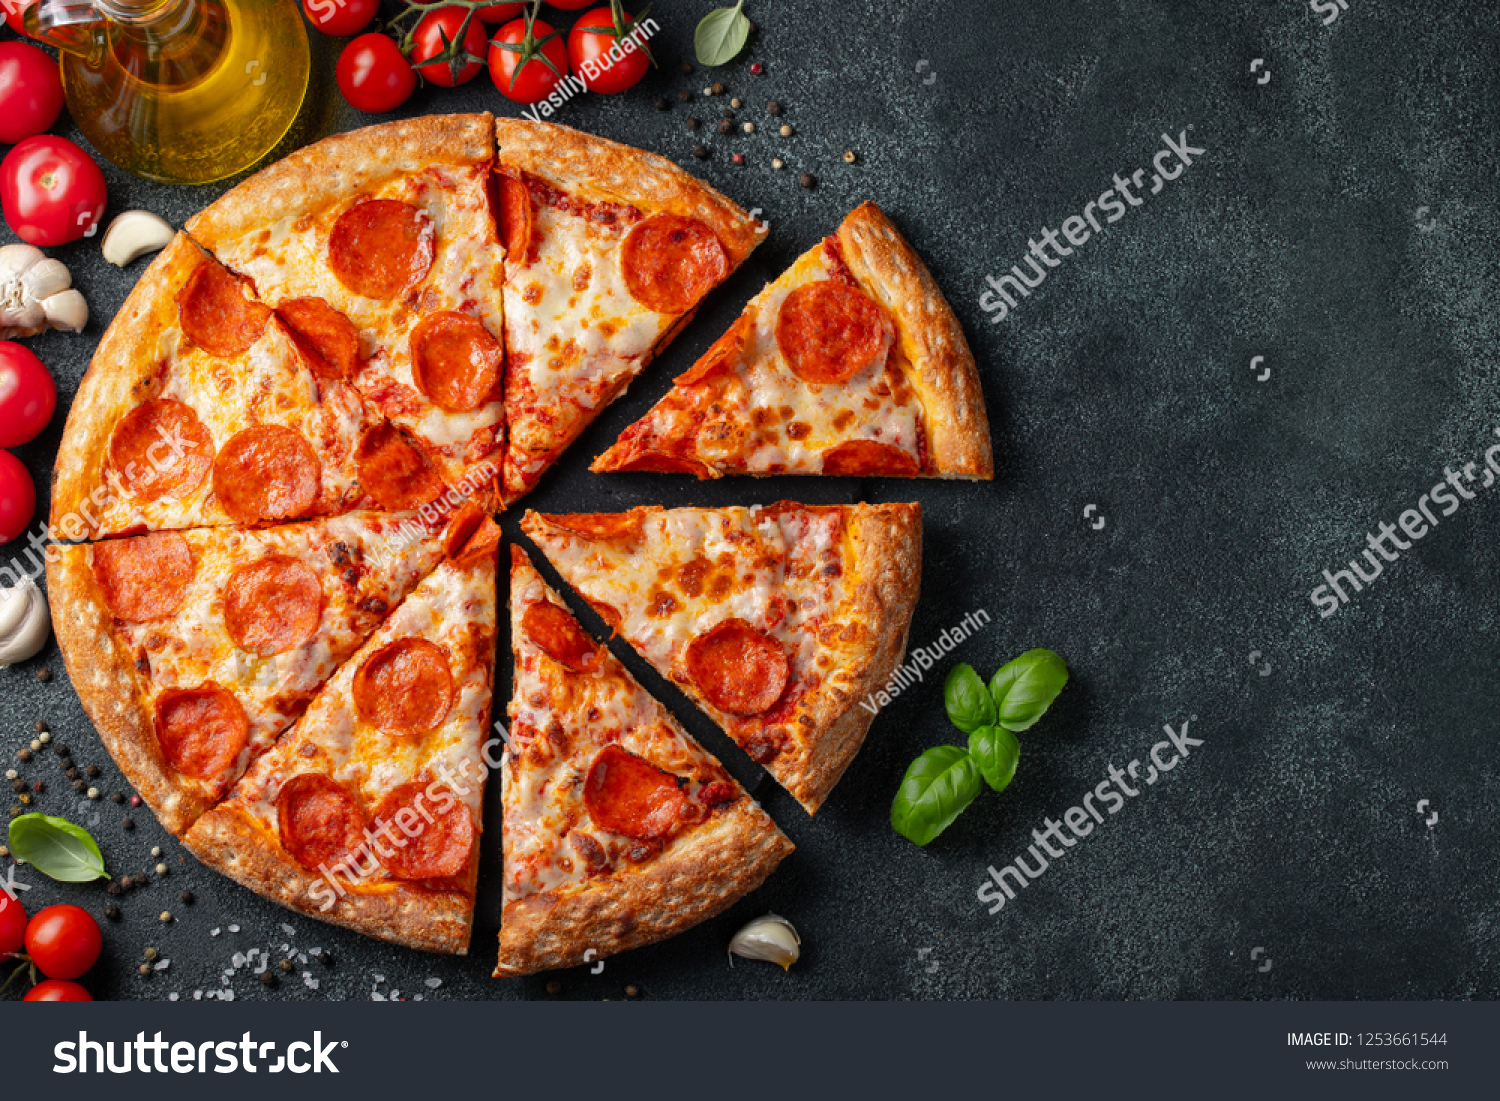 Tasty pepperoni pizza and cooking ingredients tomatoes basil on black concrete background. Top view of hot pepperoni pizza. With copy space for text. Flat lay #1253661544